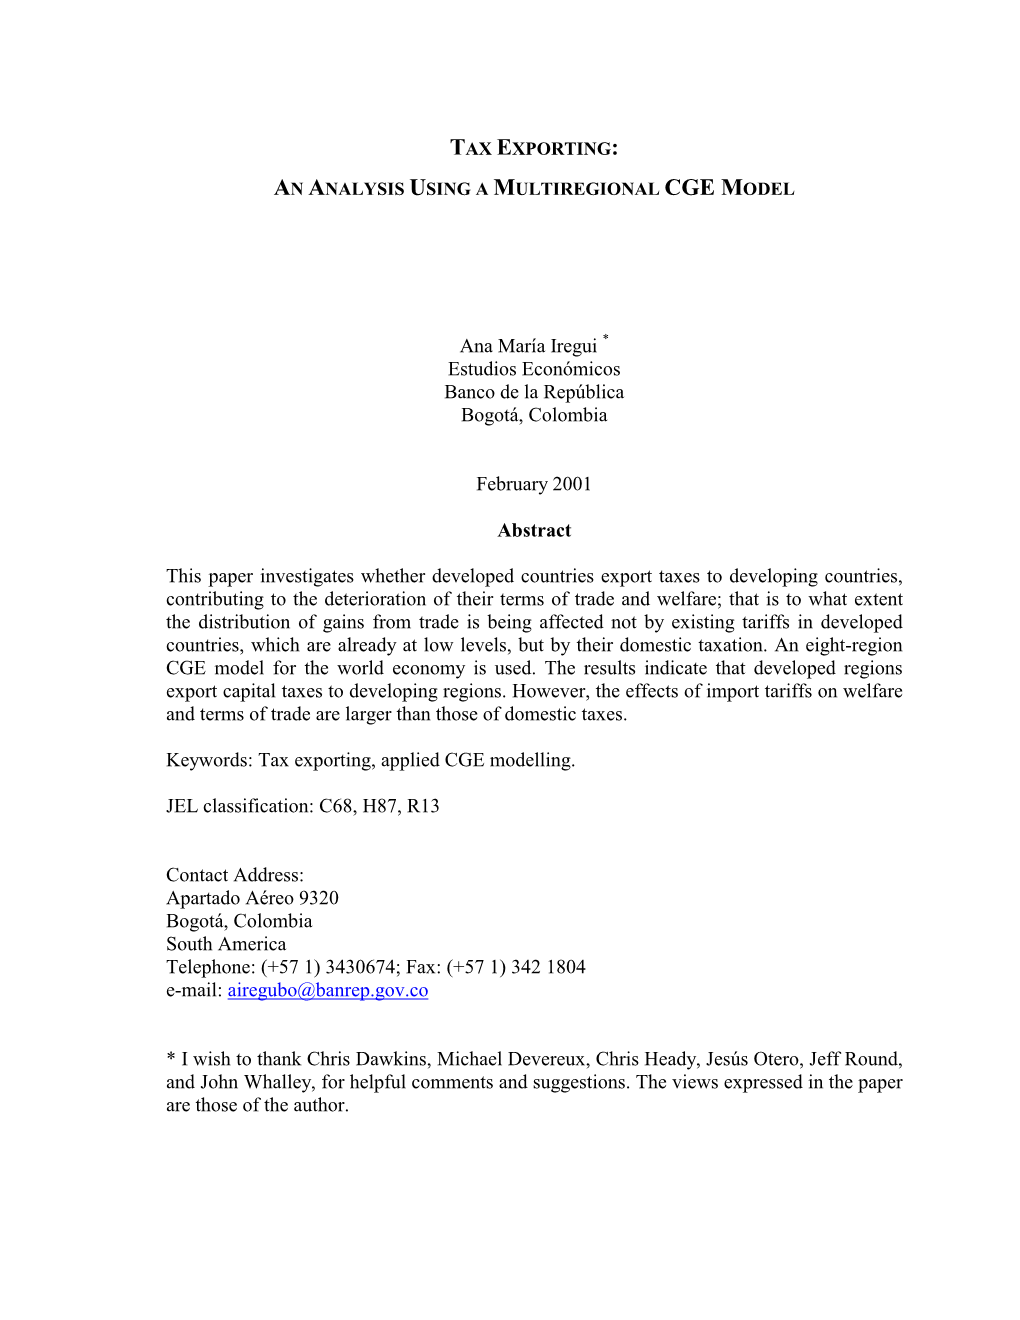 Tax Exporting: an Analysis Using a Multiregional Cge Model